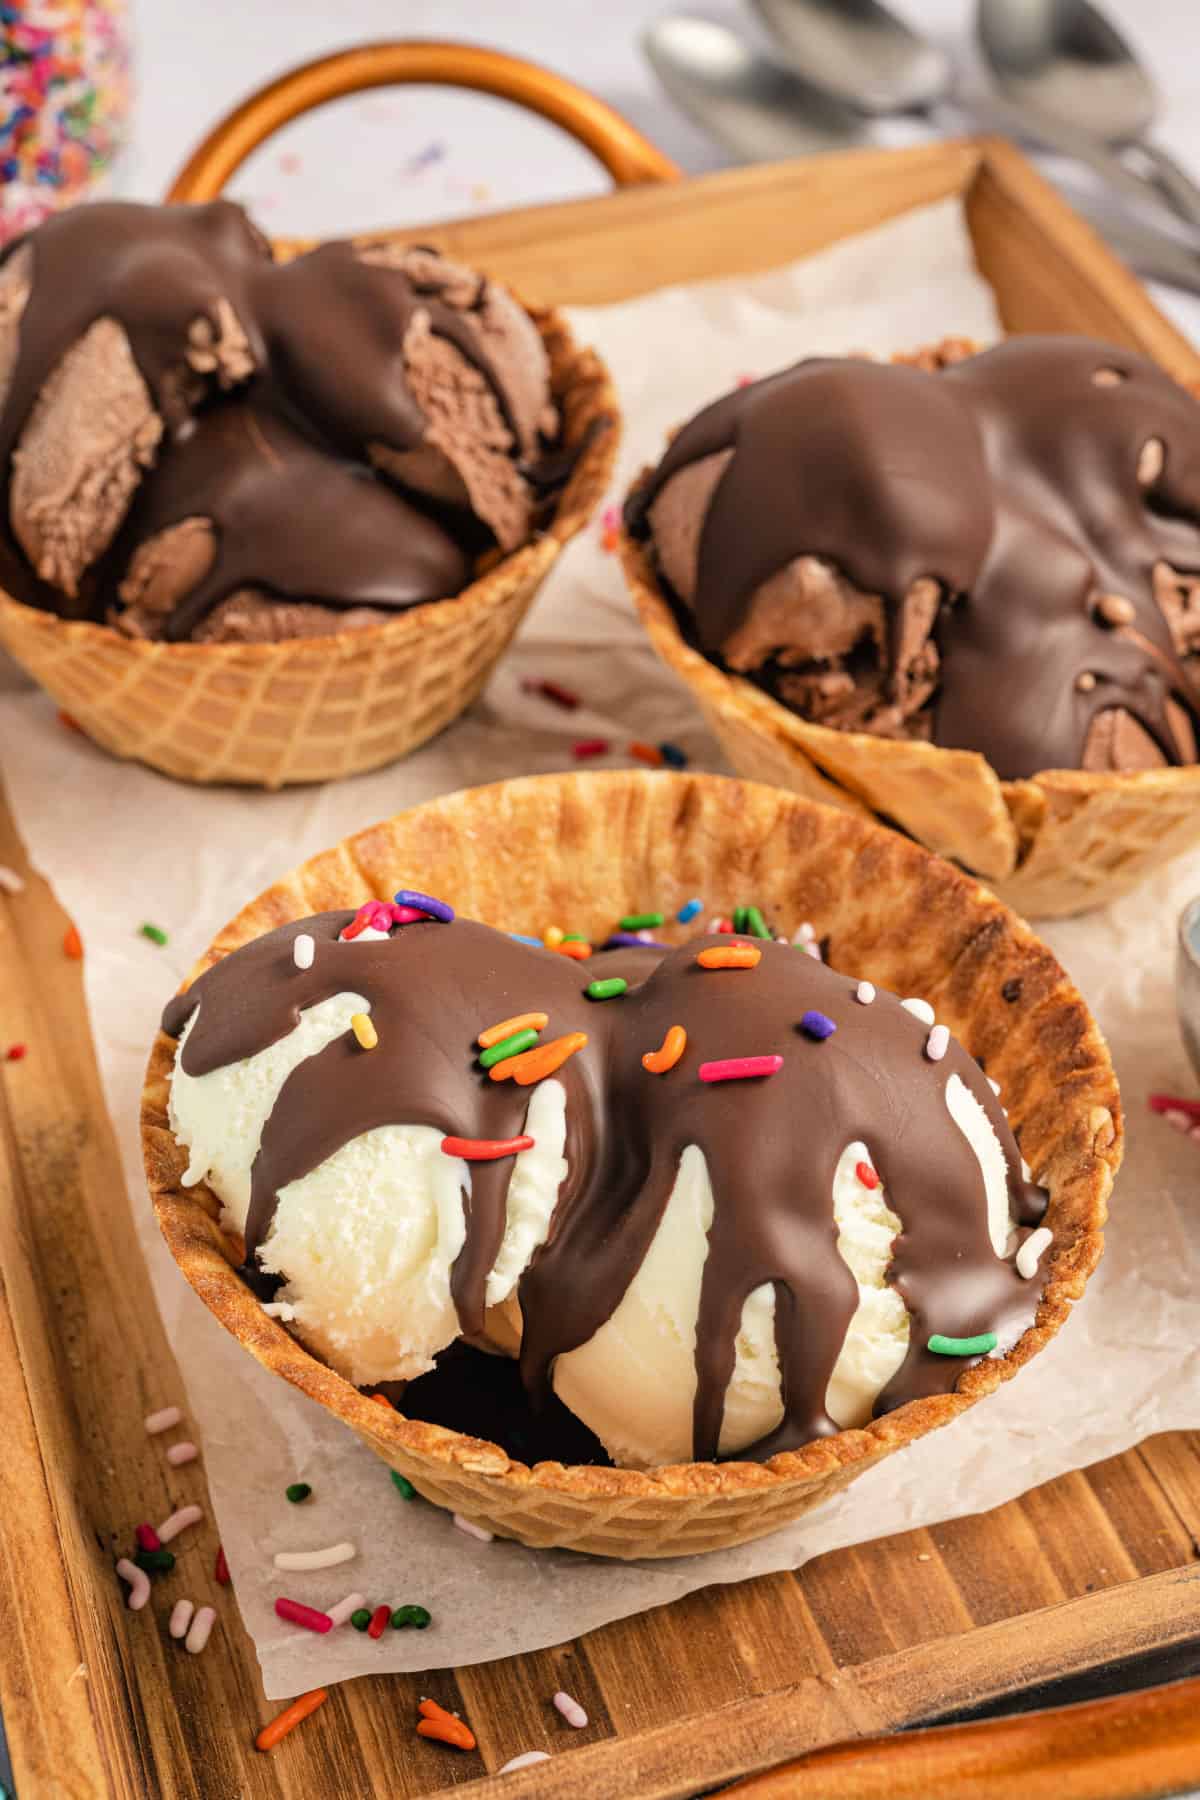 Magic shell chocolate drizzled over three waffle bowls of ice cream.